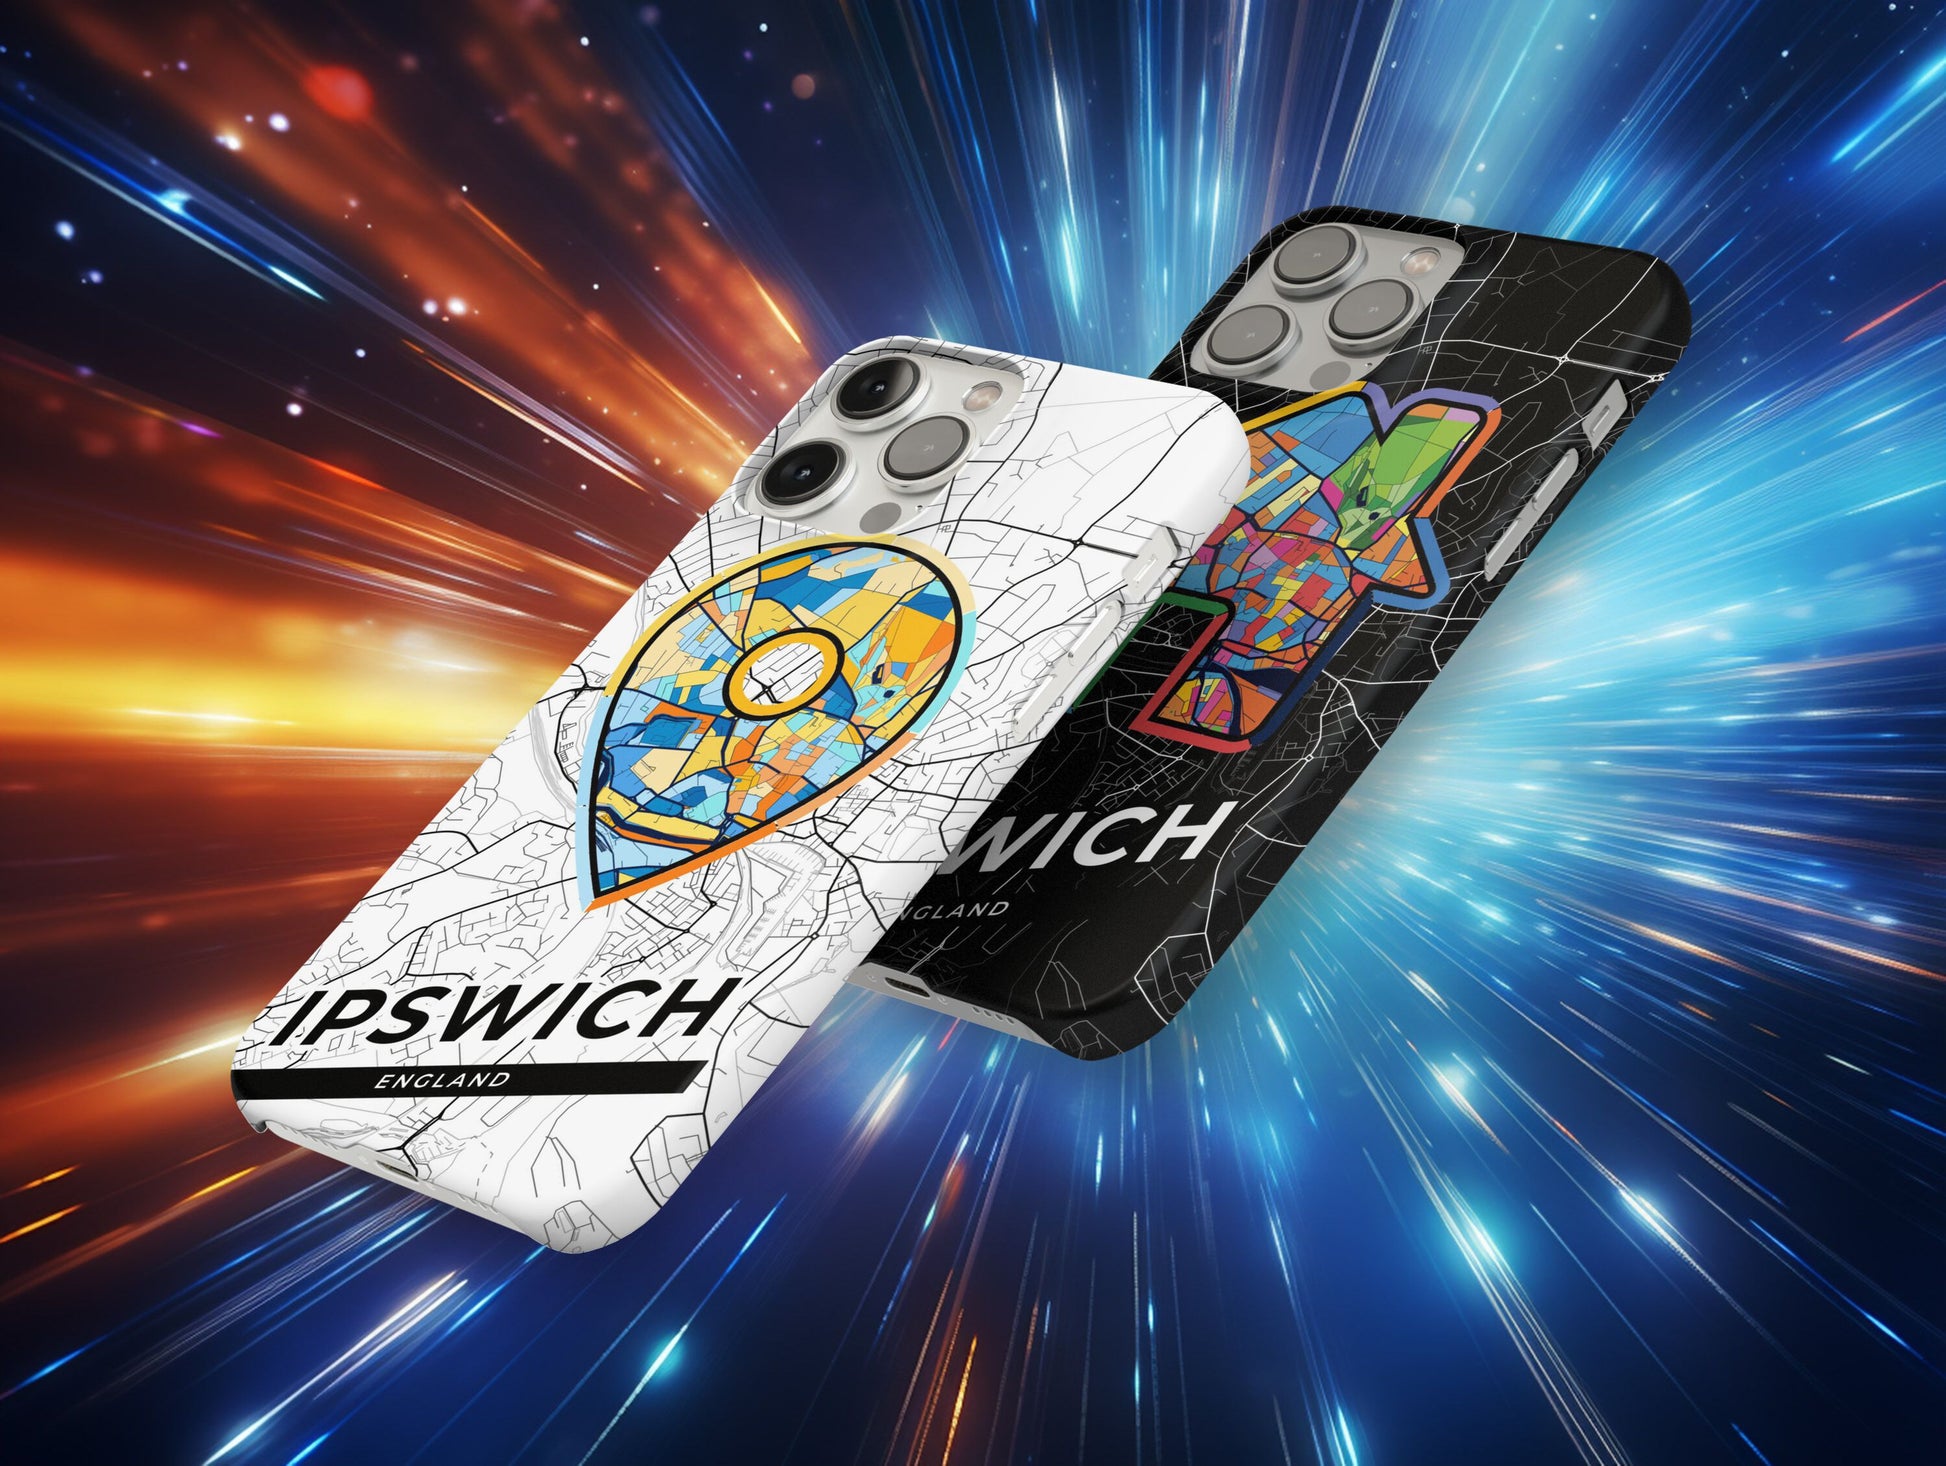 Ipswich England slim phone case with colorful icon. Birthday, wedding or housewarming gift. Couple match cases.